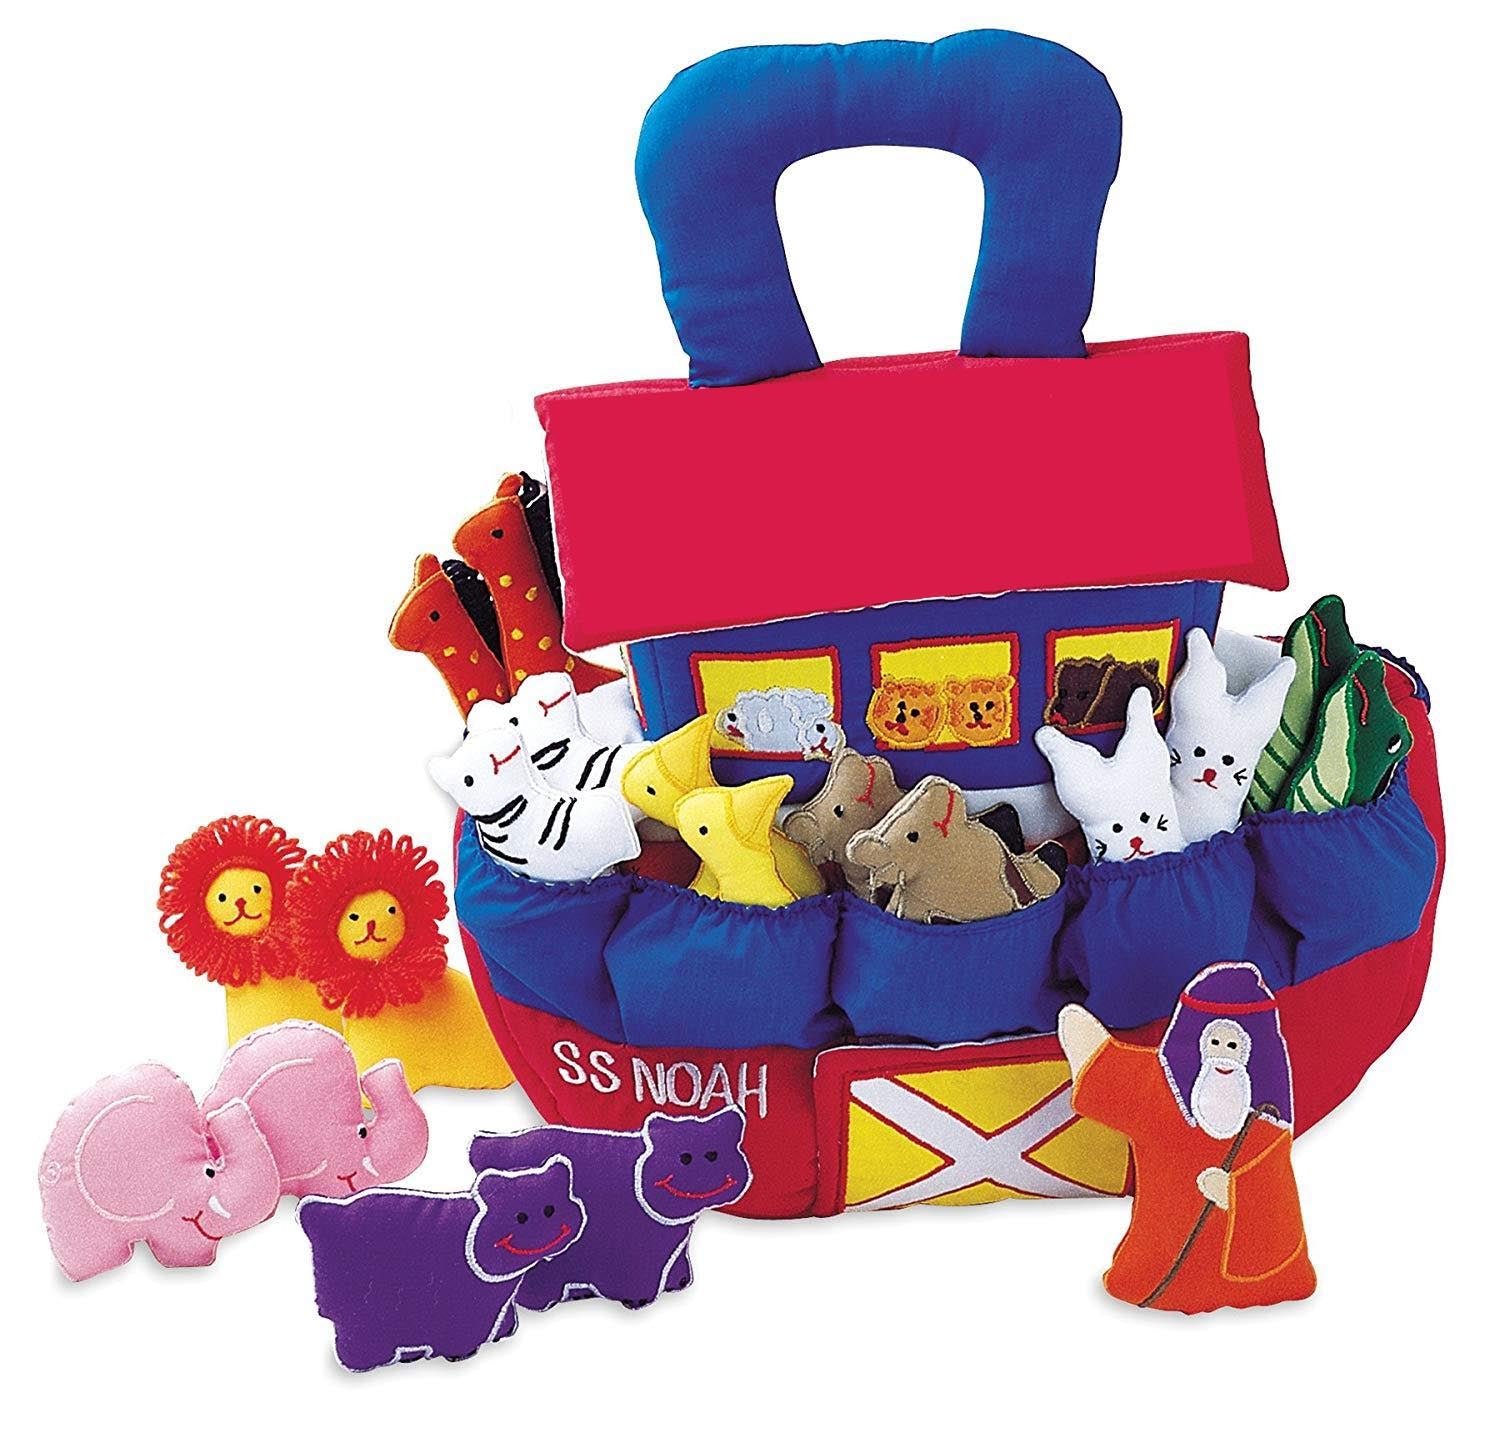 SS Noah’s Ark Playset - Pockets of Learning